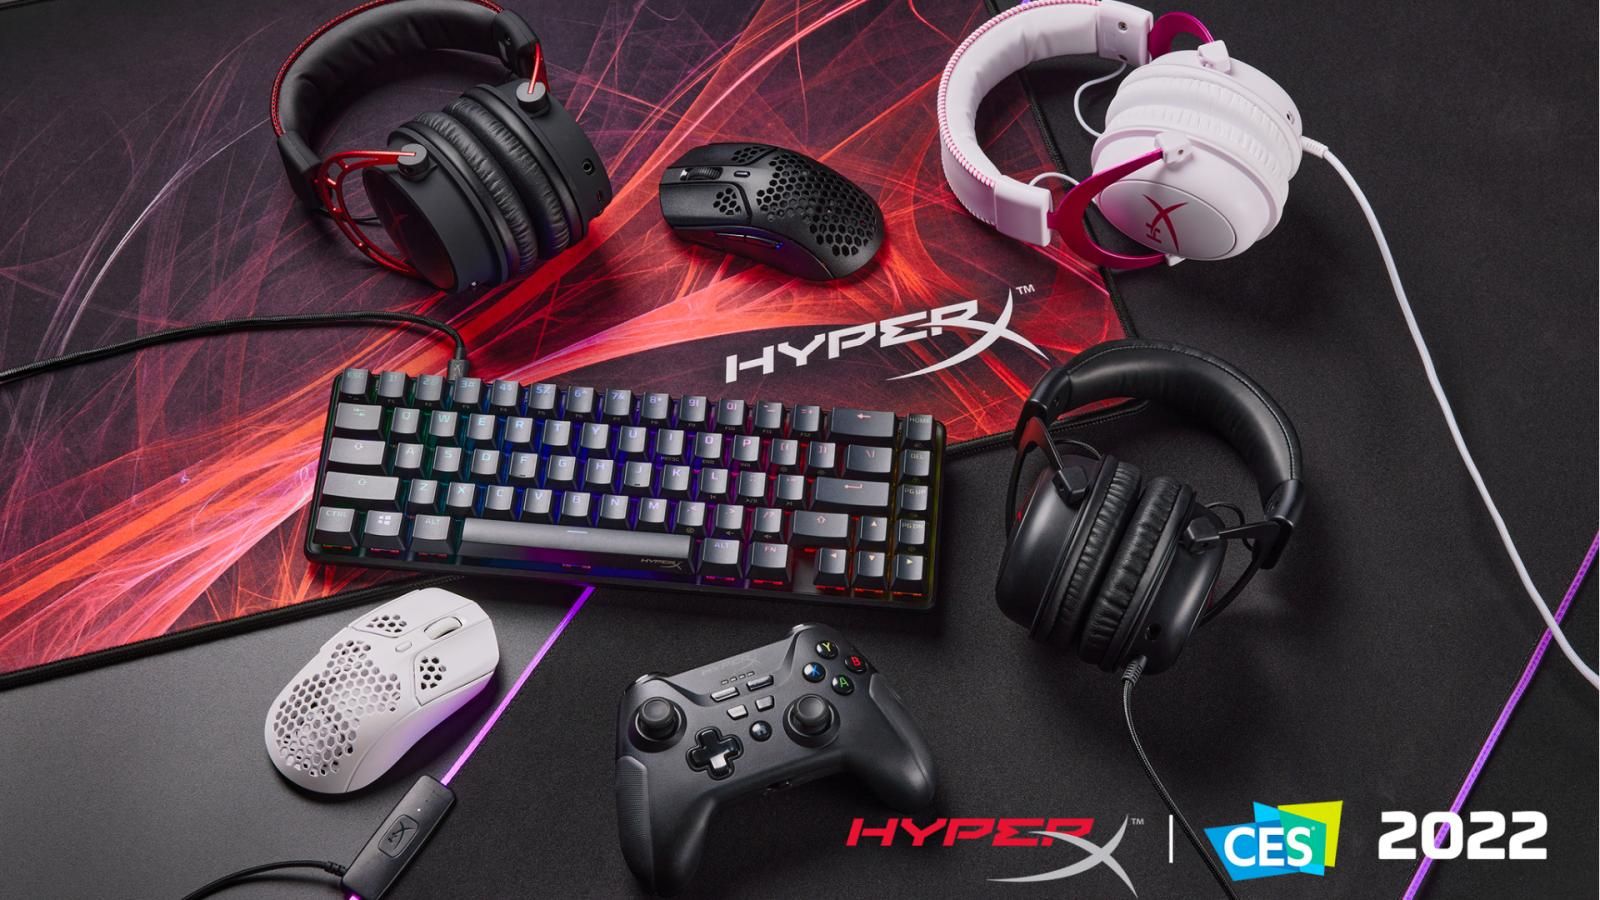 HyperX CES 2022 gaming accessories